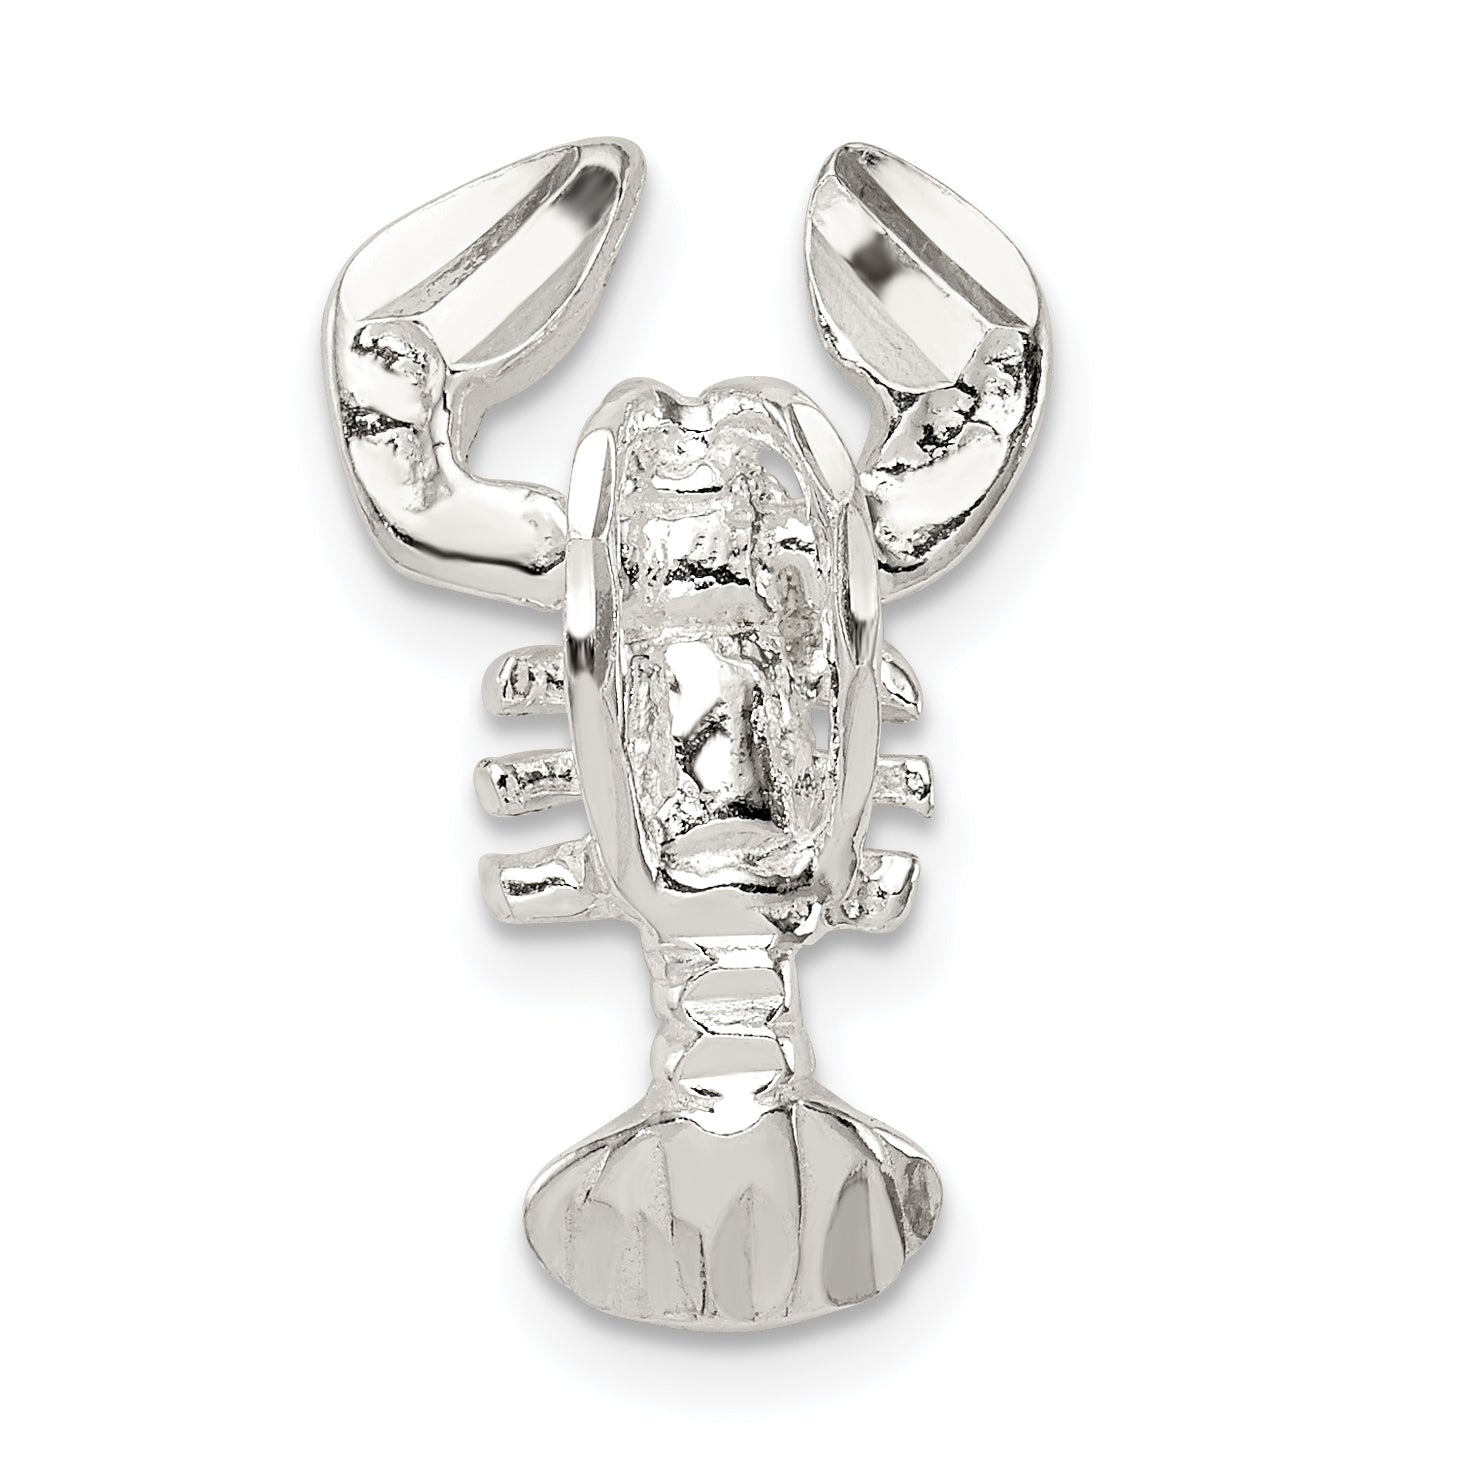 Sterling Silver Lobster Chain Slide Charm